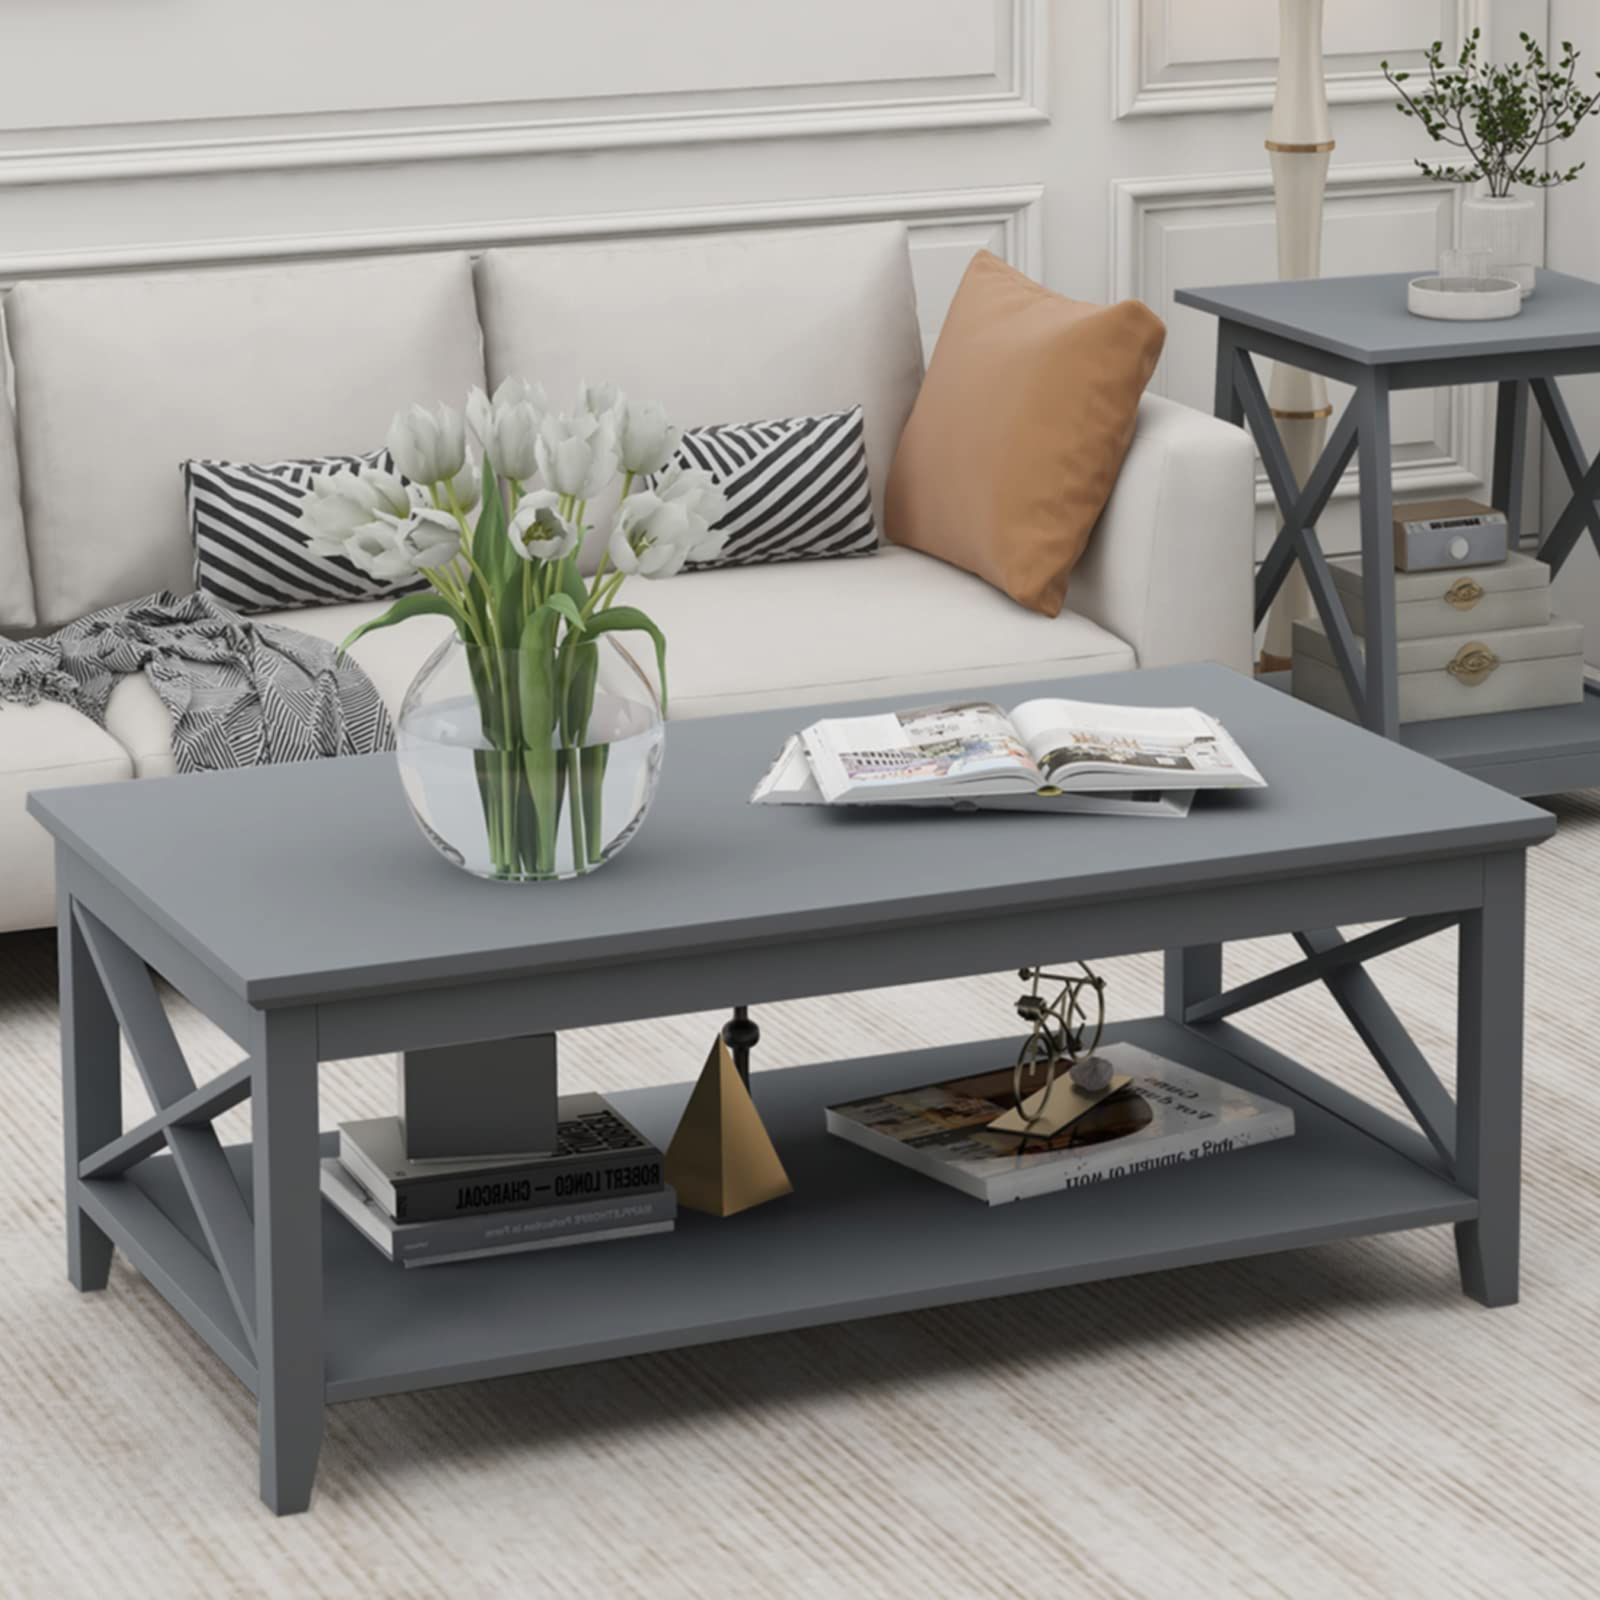 Best And Newest Amazon: Choochoo Coffee Table Classic X Design For Living Room,  Rectangular Modern Cocktail Table With Storage Shelf, 39 Inch (grey) : Home  & Kitchen In Modern Wooden X Design Coffee Tables (Photo 5 of 10)